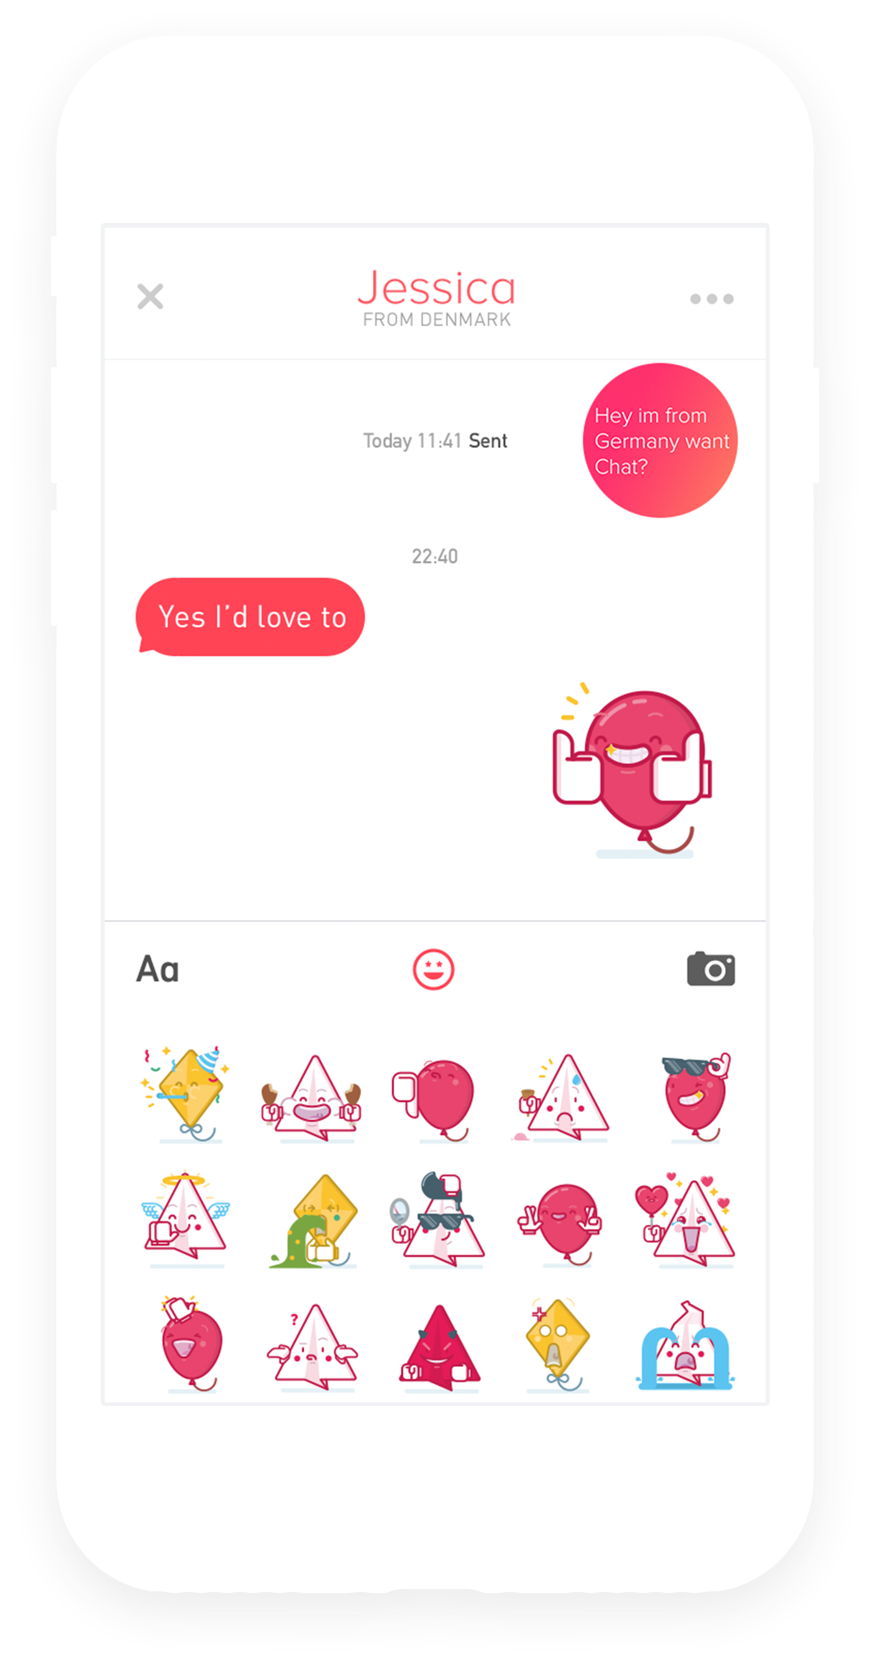 chat screen showing sticker design